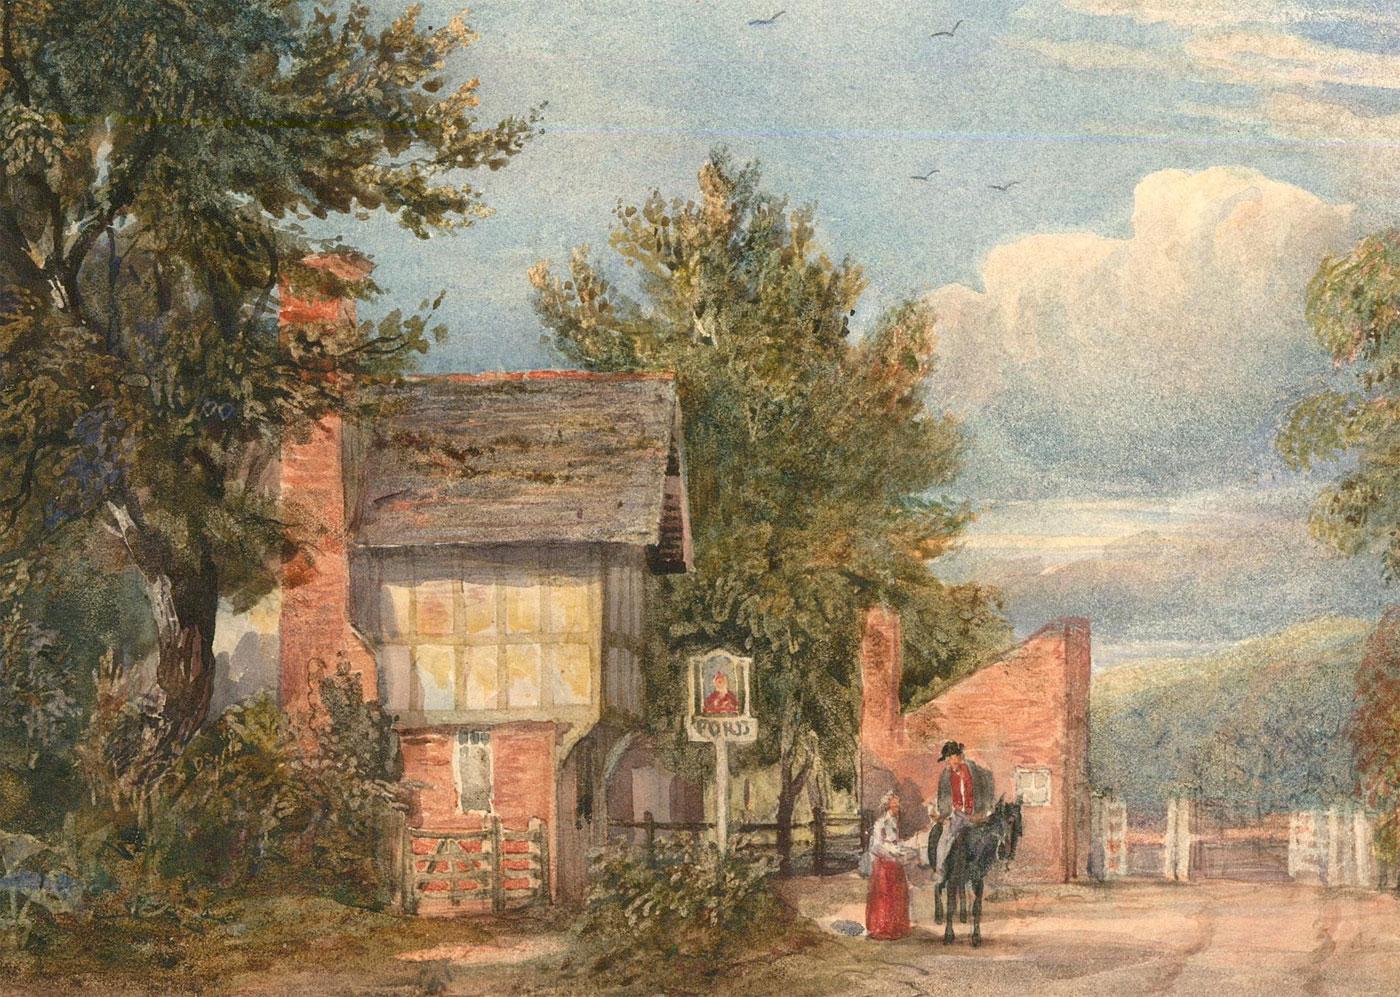 Unknown Landscape Art - Mid 19th Century Watercolour - A Stop at the Inn